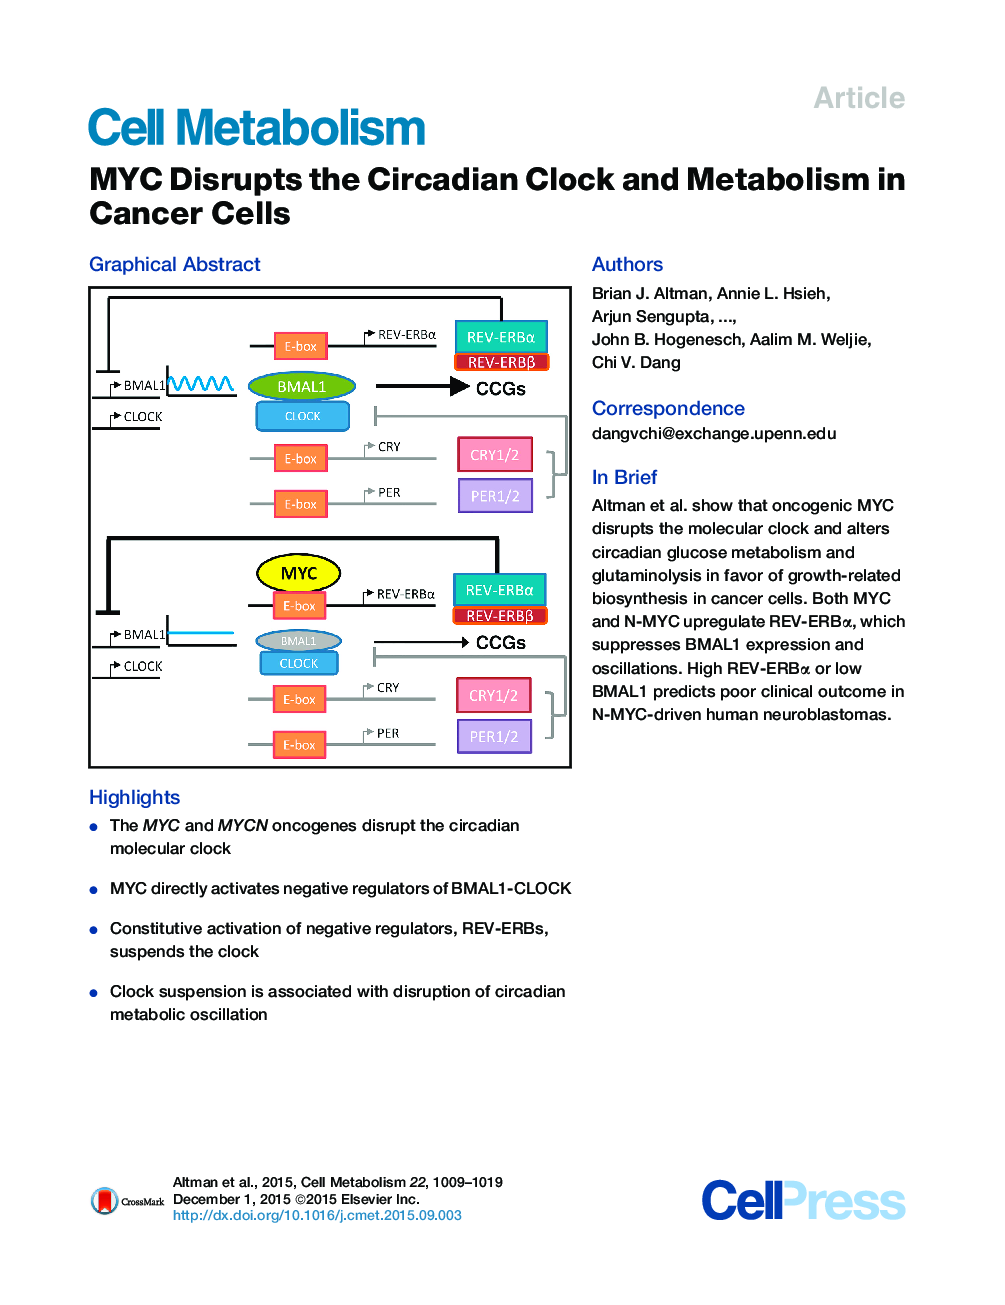 MYC Disrupts the Circadian Clock and Metabolism in Cancer Cells